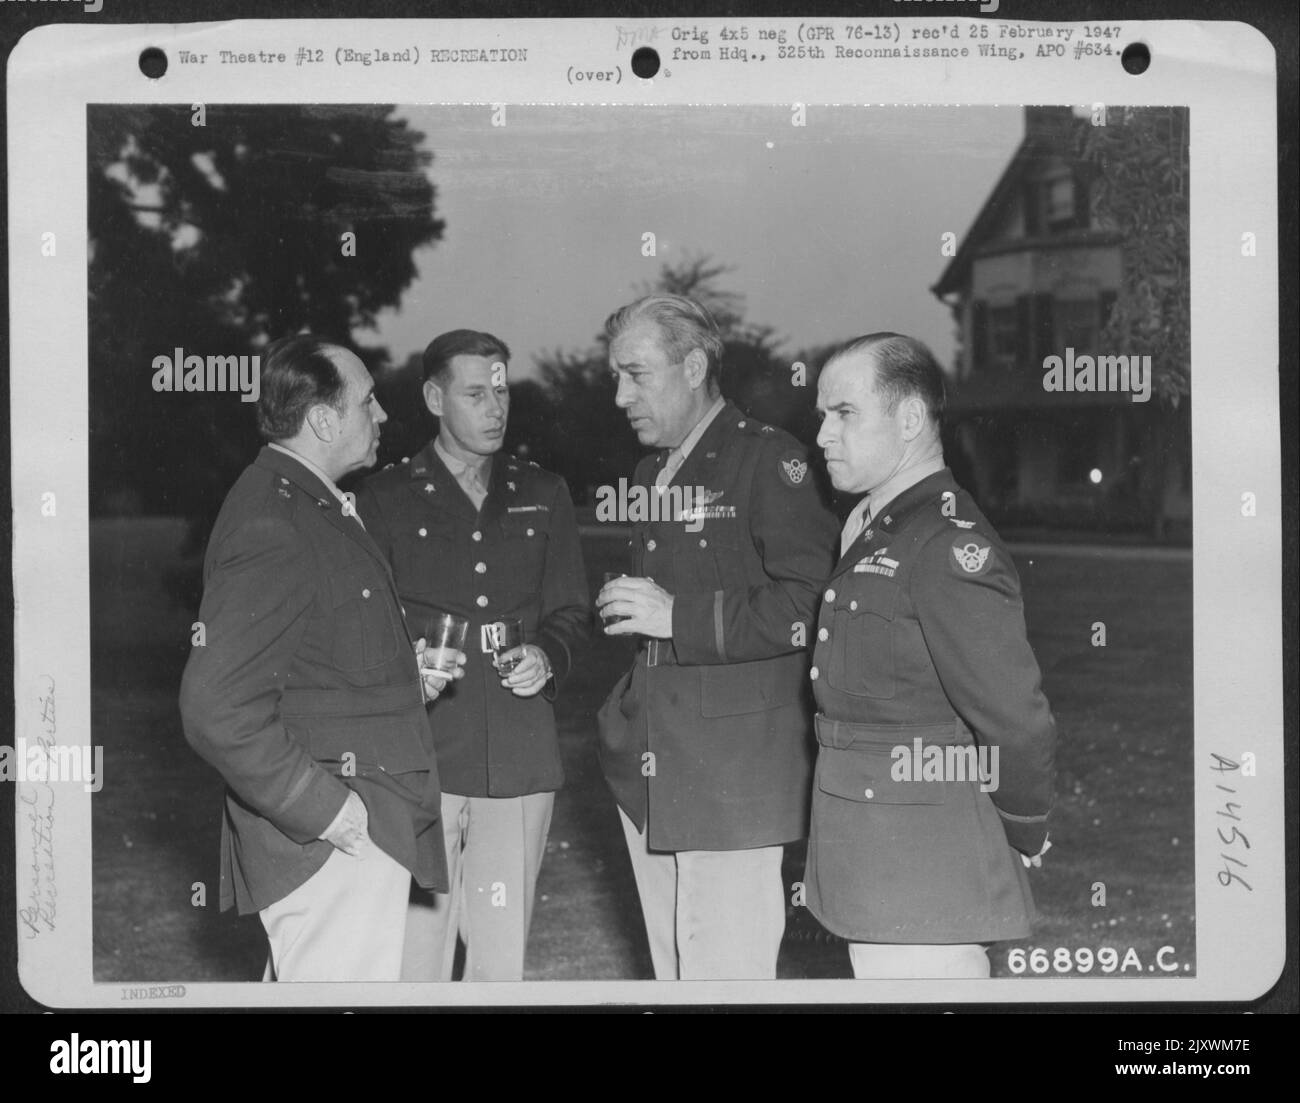 The Guest List At A Party Given By Gen. James H. Doolittle In 1944 At Viii Bomber Command Headquarters, England, Included Brig. Gen. Arthur W. Vanaman (Left) And Brig. General Orvil A. Anderson (Right, Center). The Other Two Officers Are Unidentified. Stock Photo